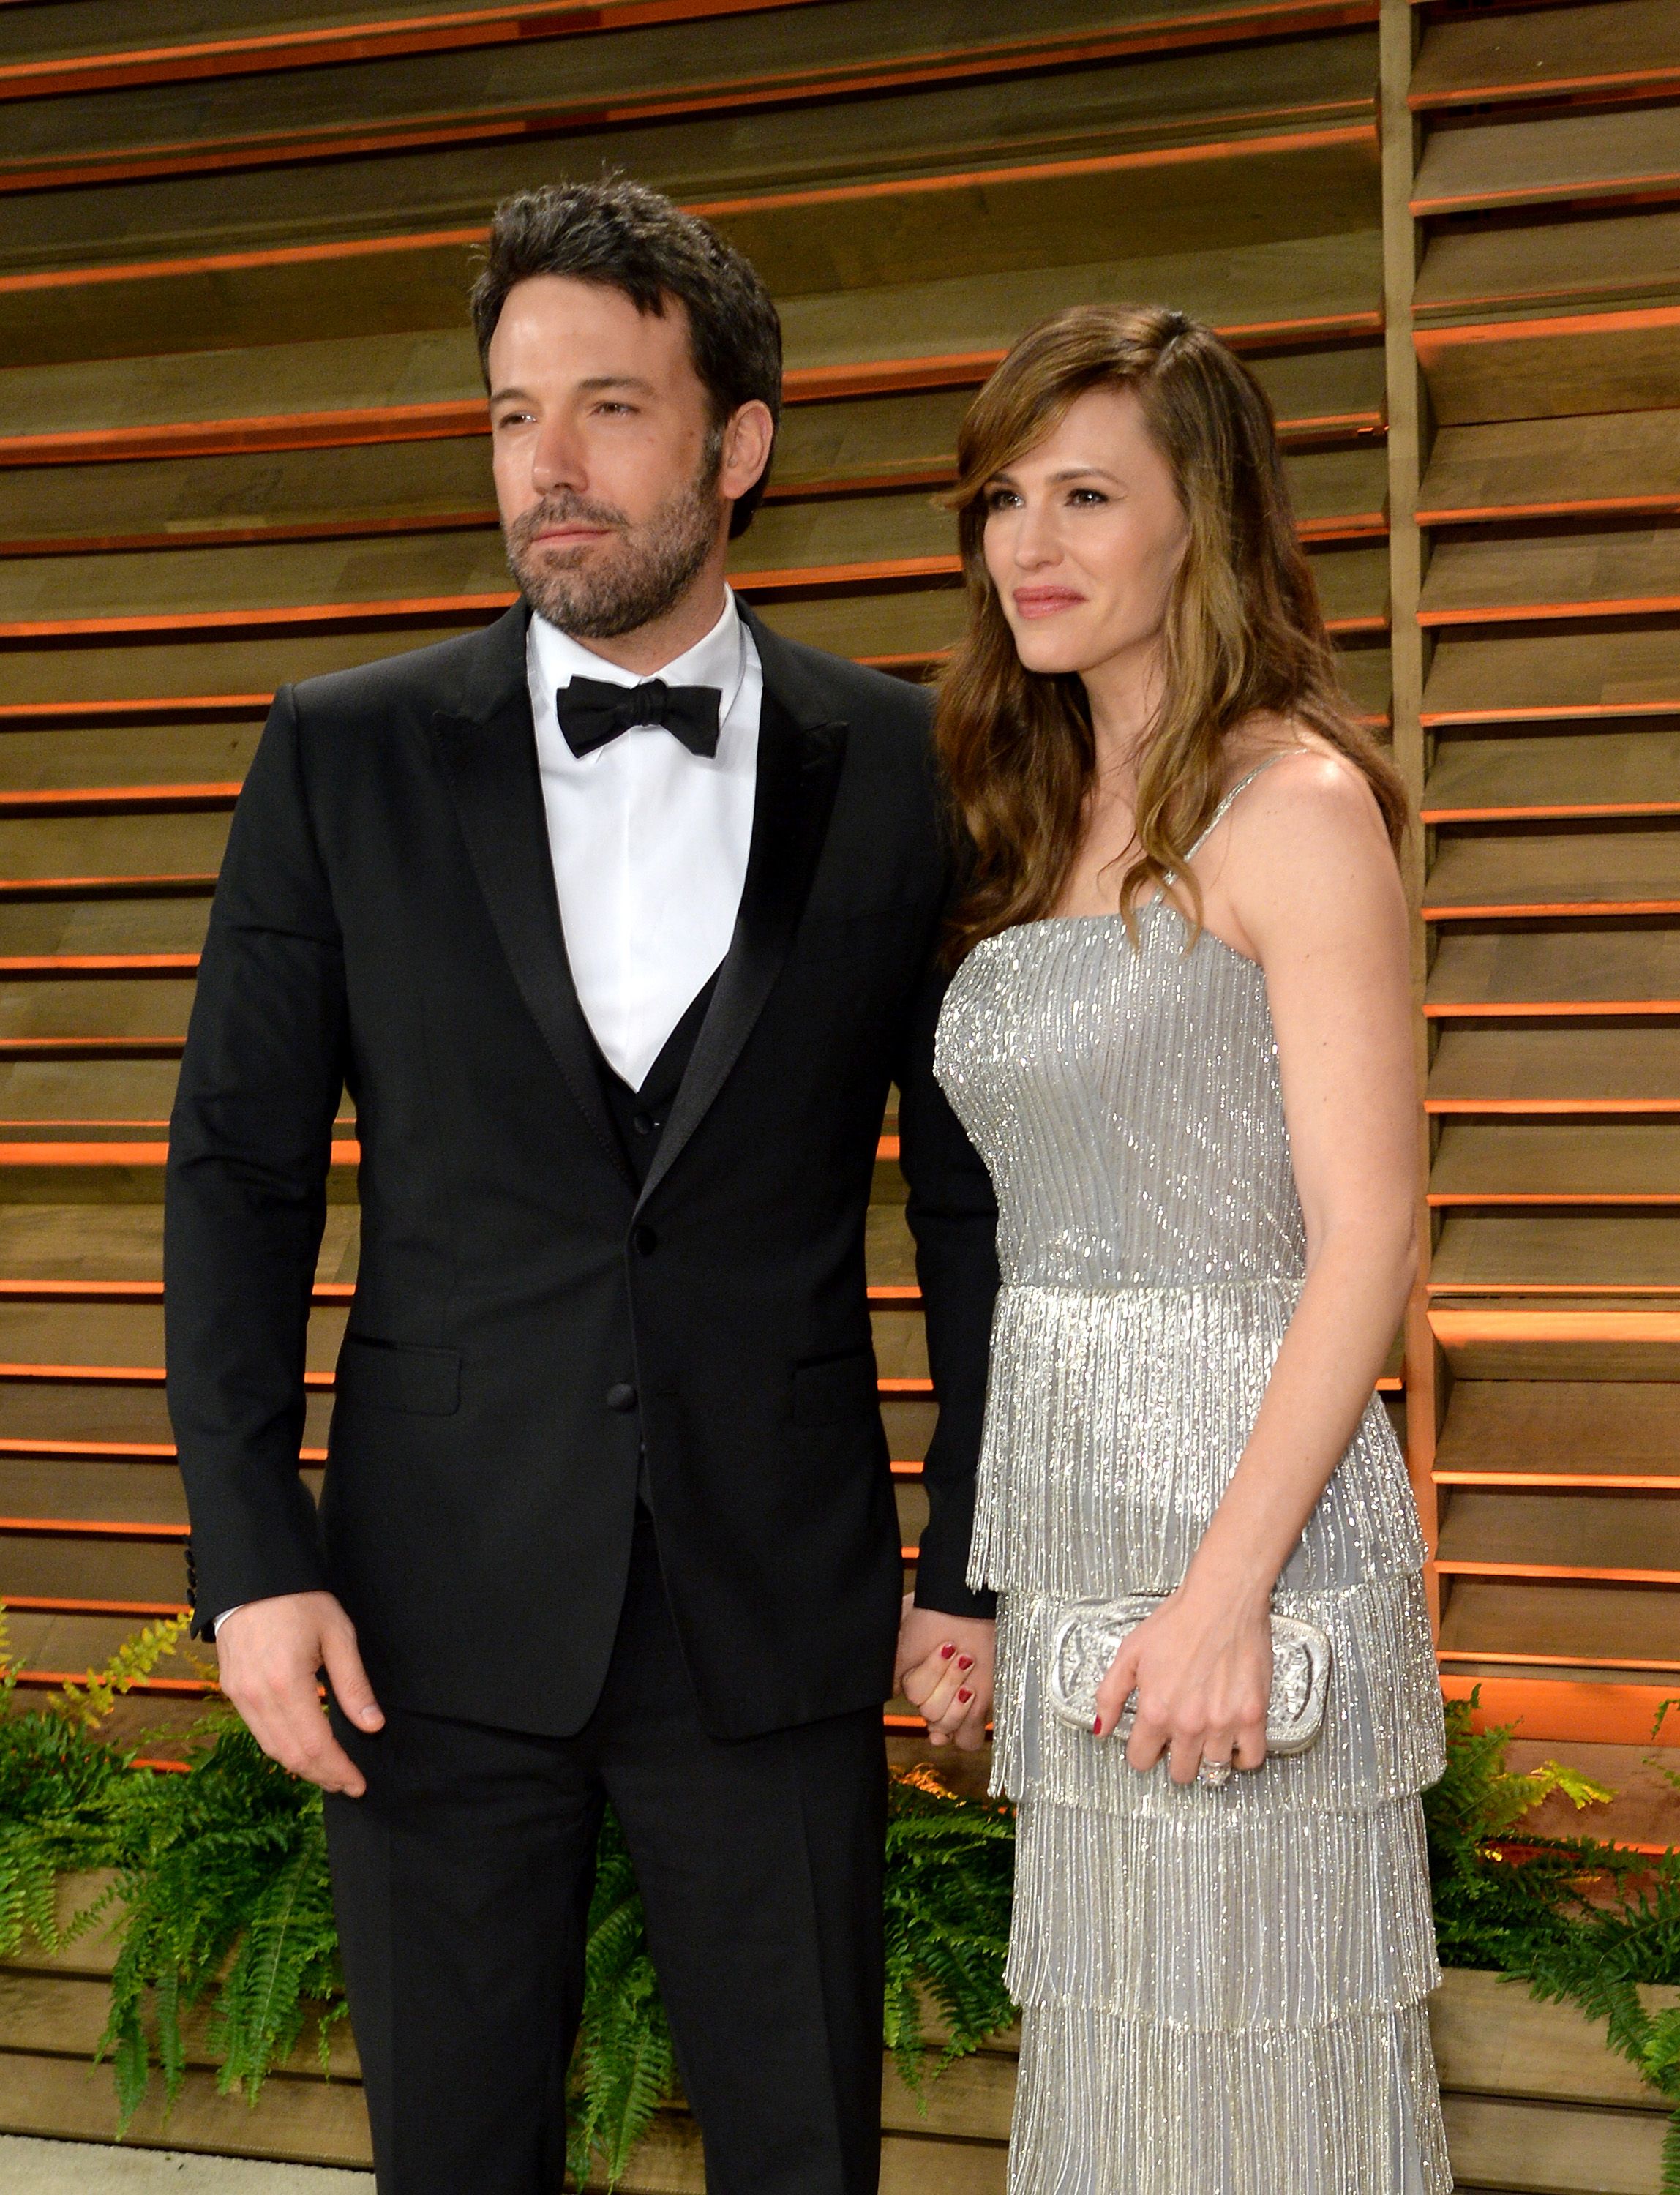 Ben Affleck and Jennifer Garner during the 2014 Vanity Fair Oscar Party on March 2, 2014 in West Hollywood, California. | Source: Getty Images